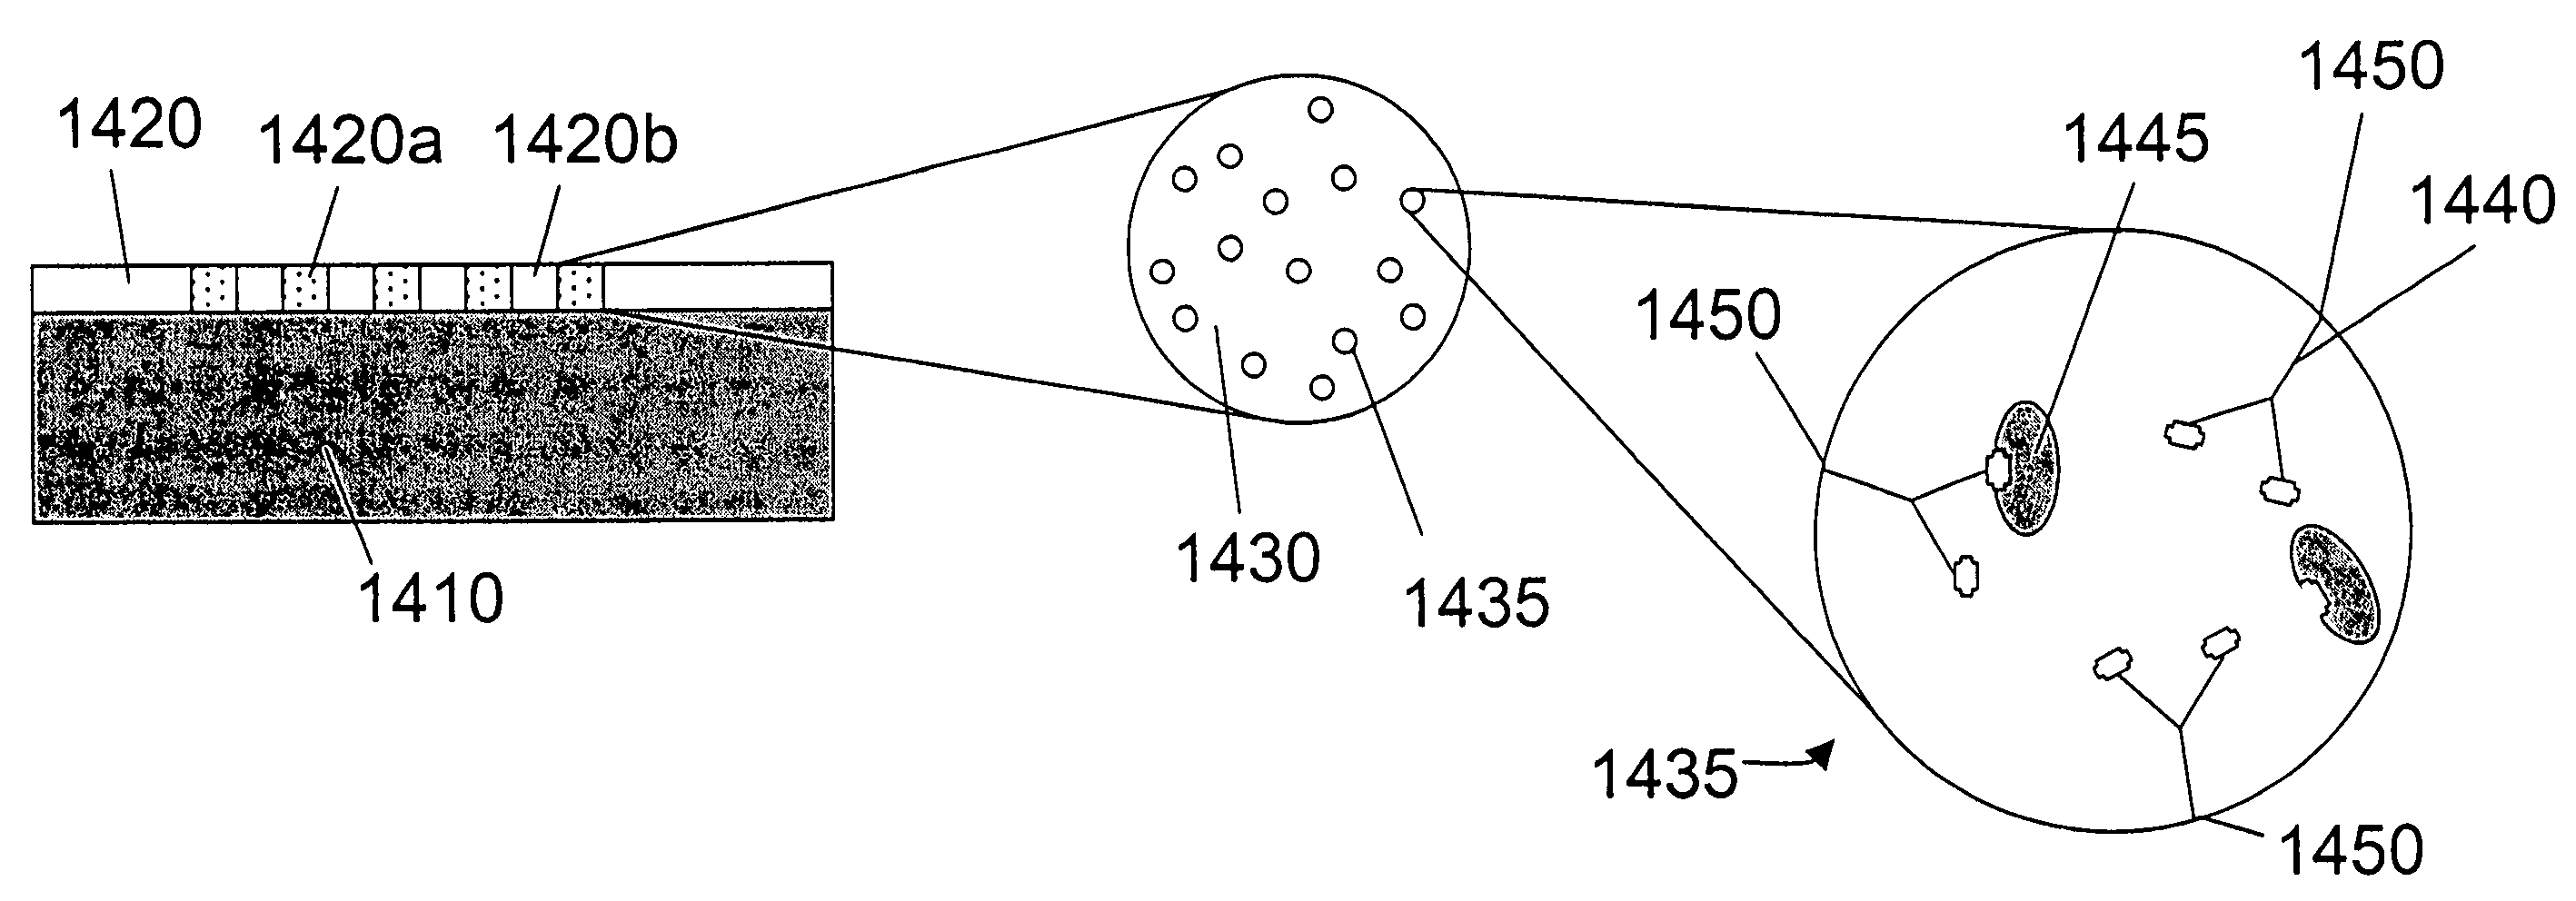 Device and method for detection and identification of biological agents